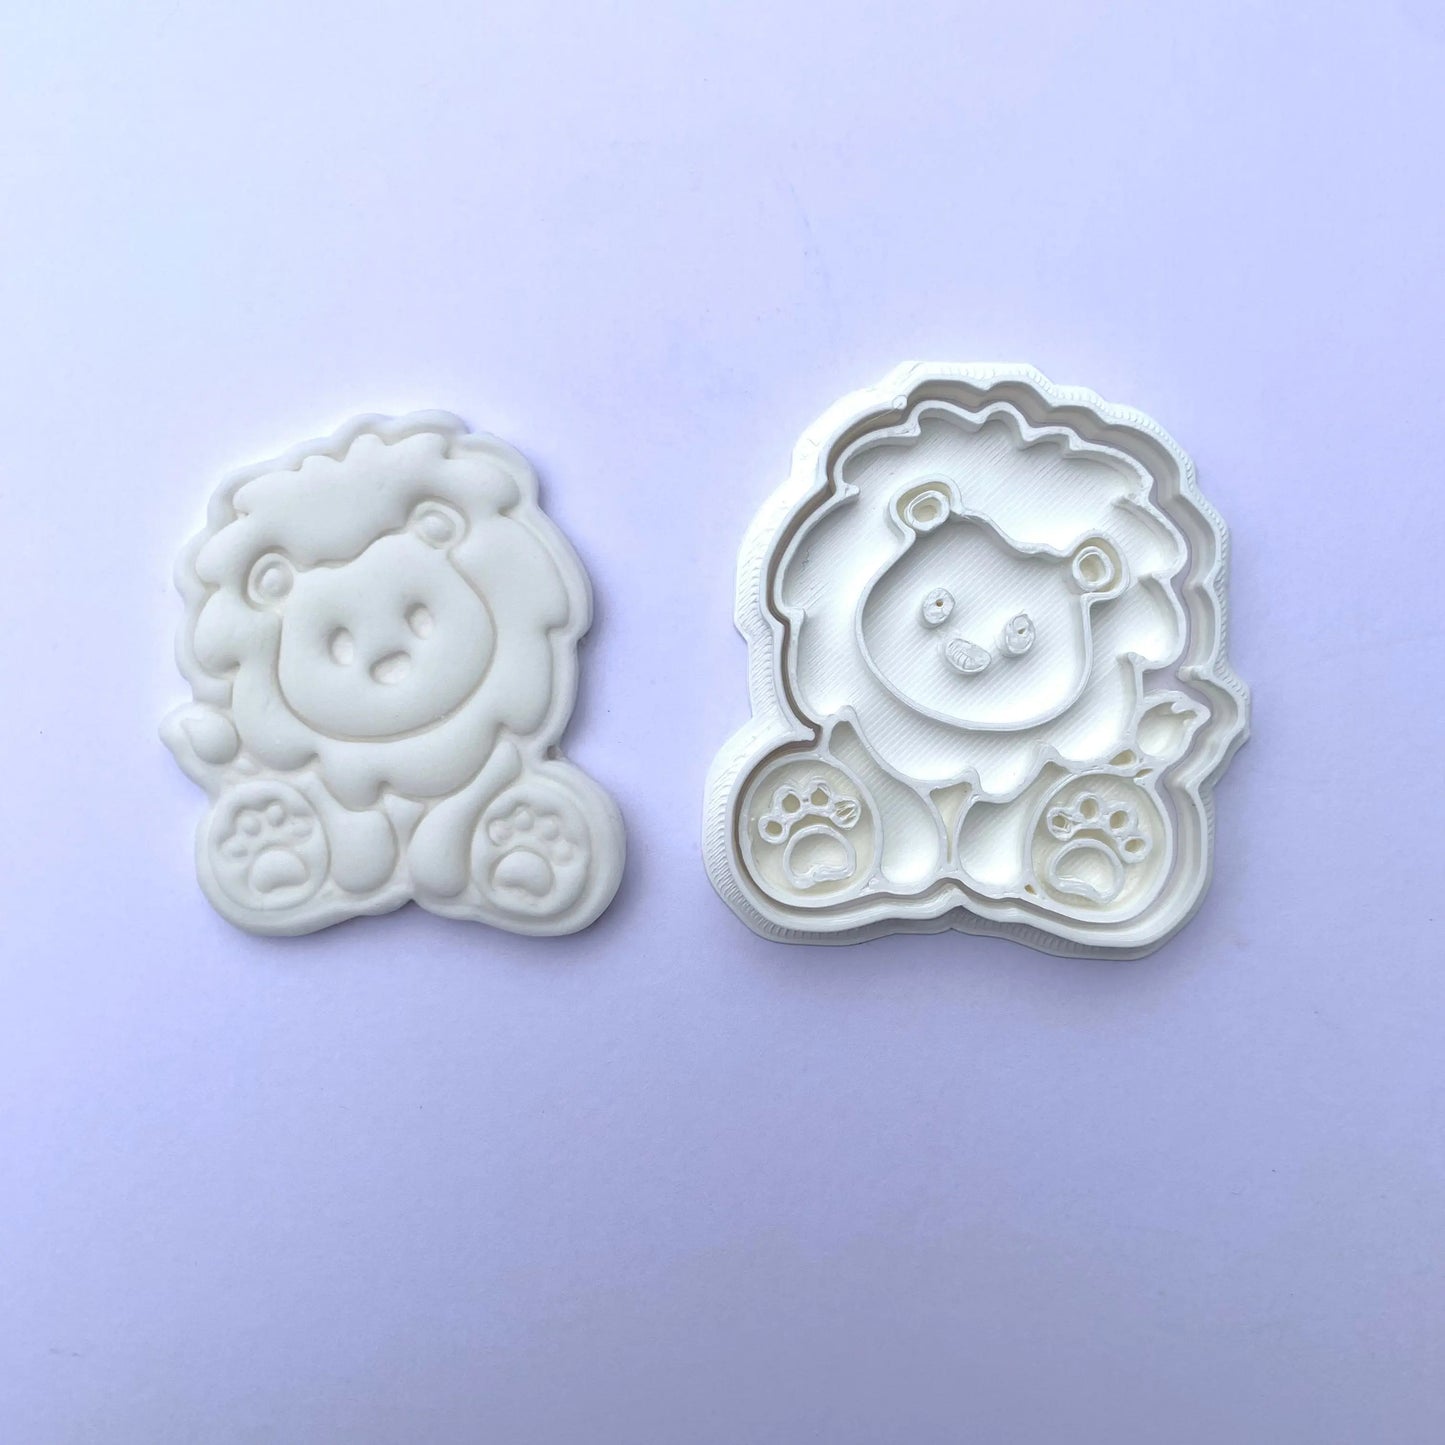 Lion - animal - cookie cutter + stamp MEG cookie cutters